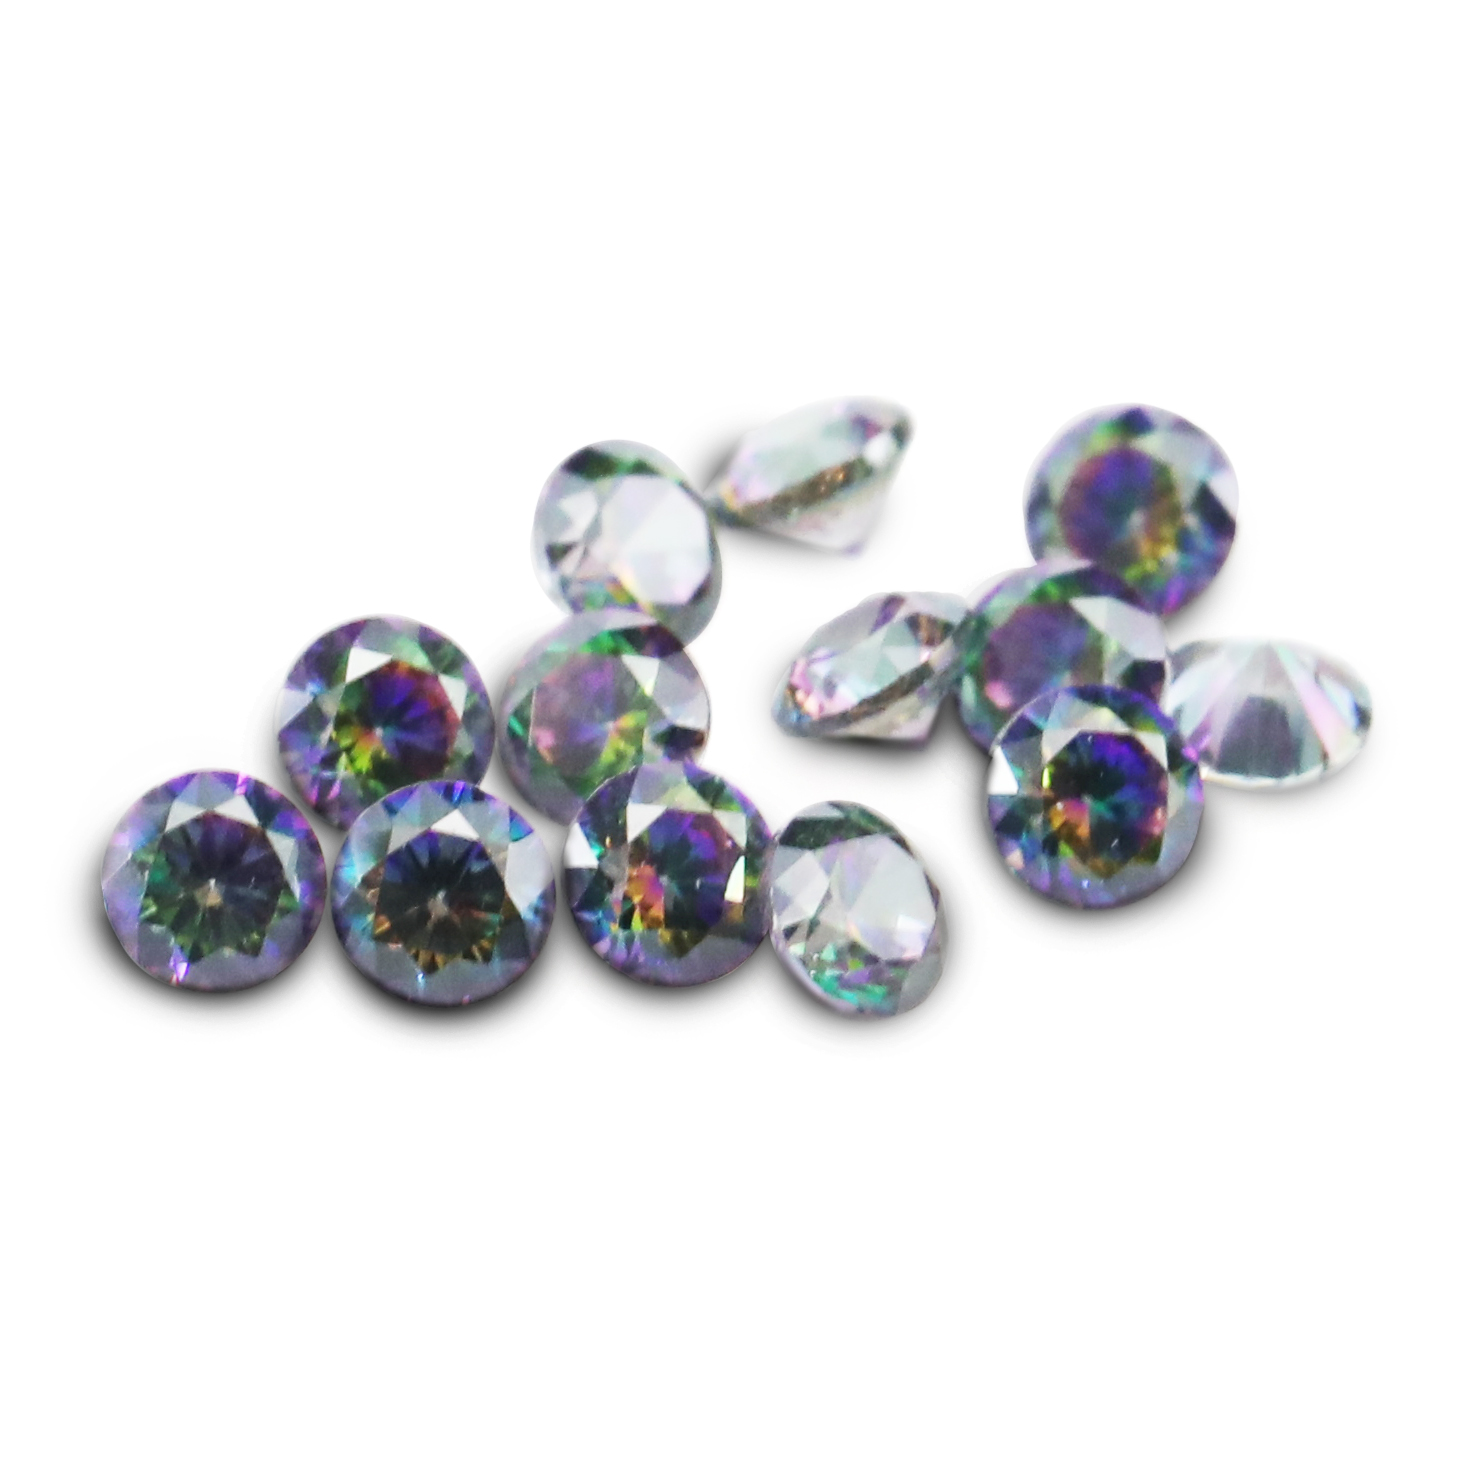 50Pcs 2MM Imitation Birthstone Round Faceted Color Cubic Zirconia CZ Stone DIY Loose Stone Supplies 4110183-2MM - Click Image to Close